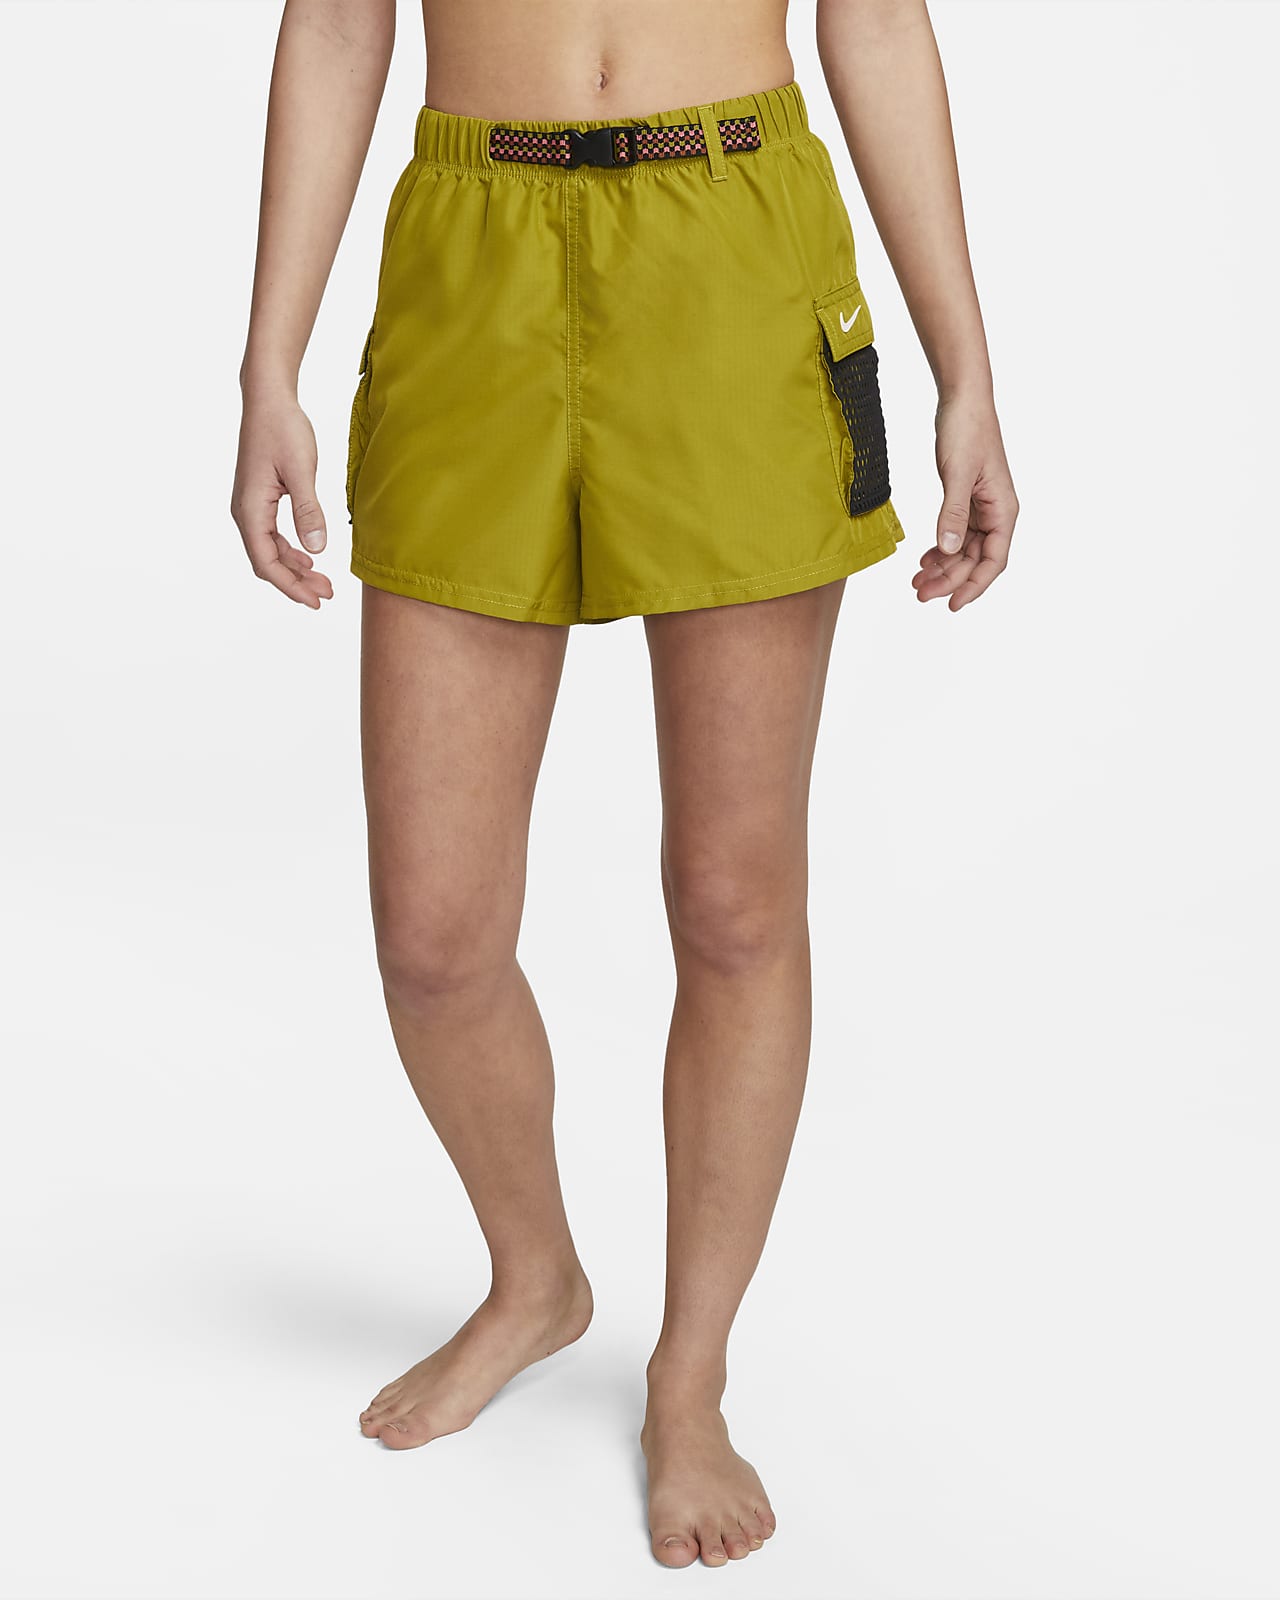 The most comfortable shortsshorts – Northern Baller